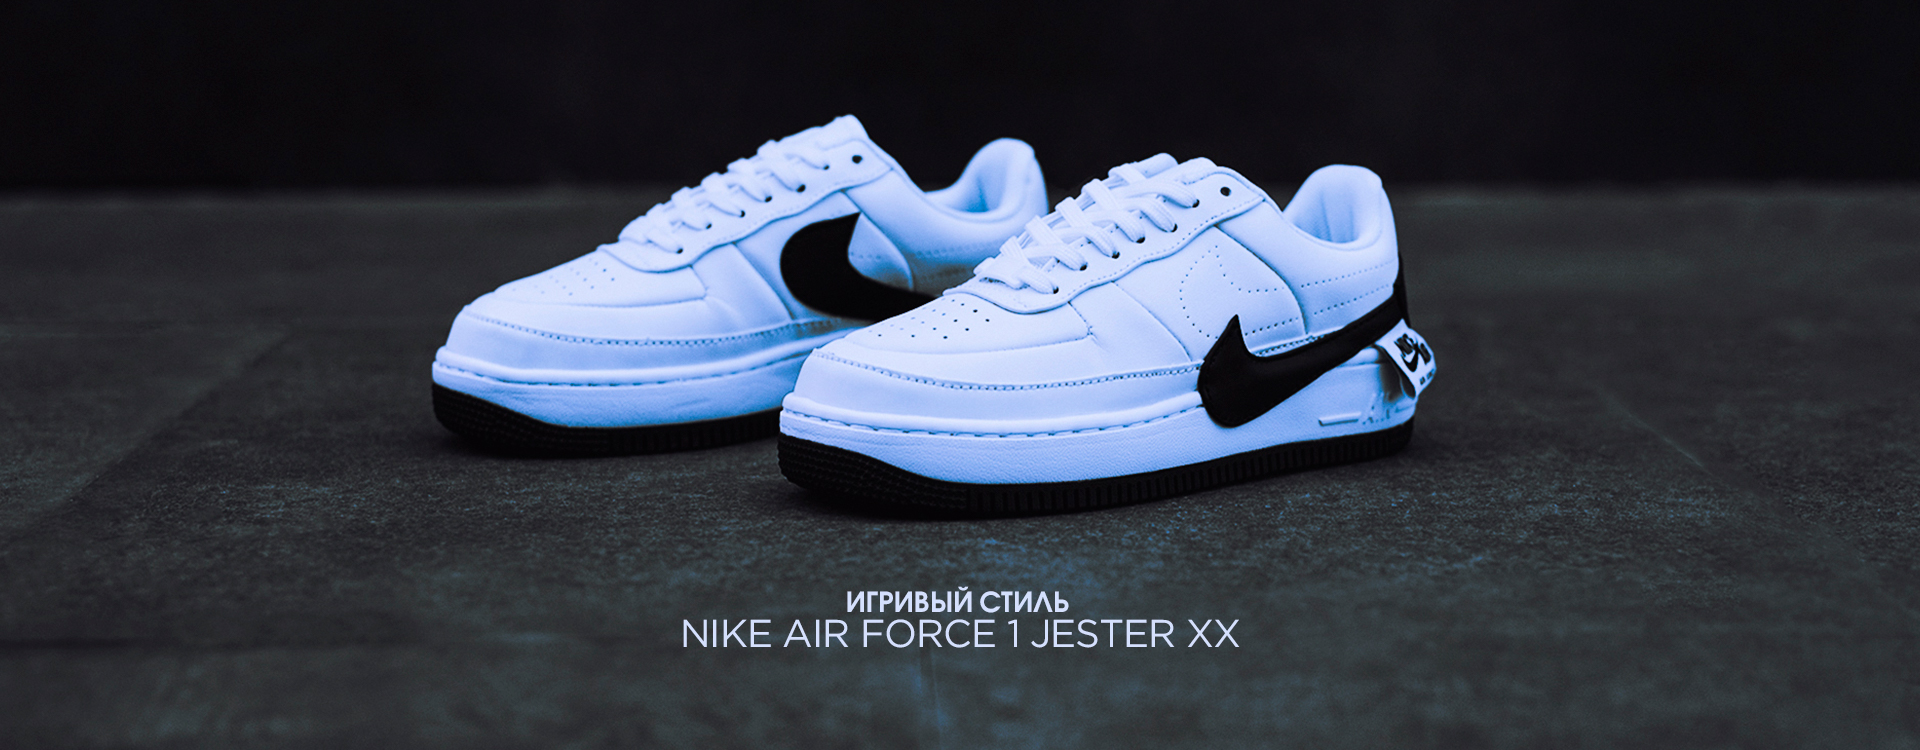 nike air force 1 jester xx blue